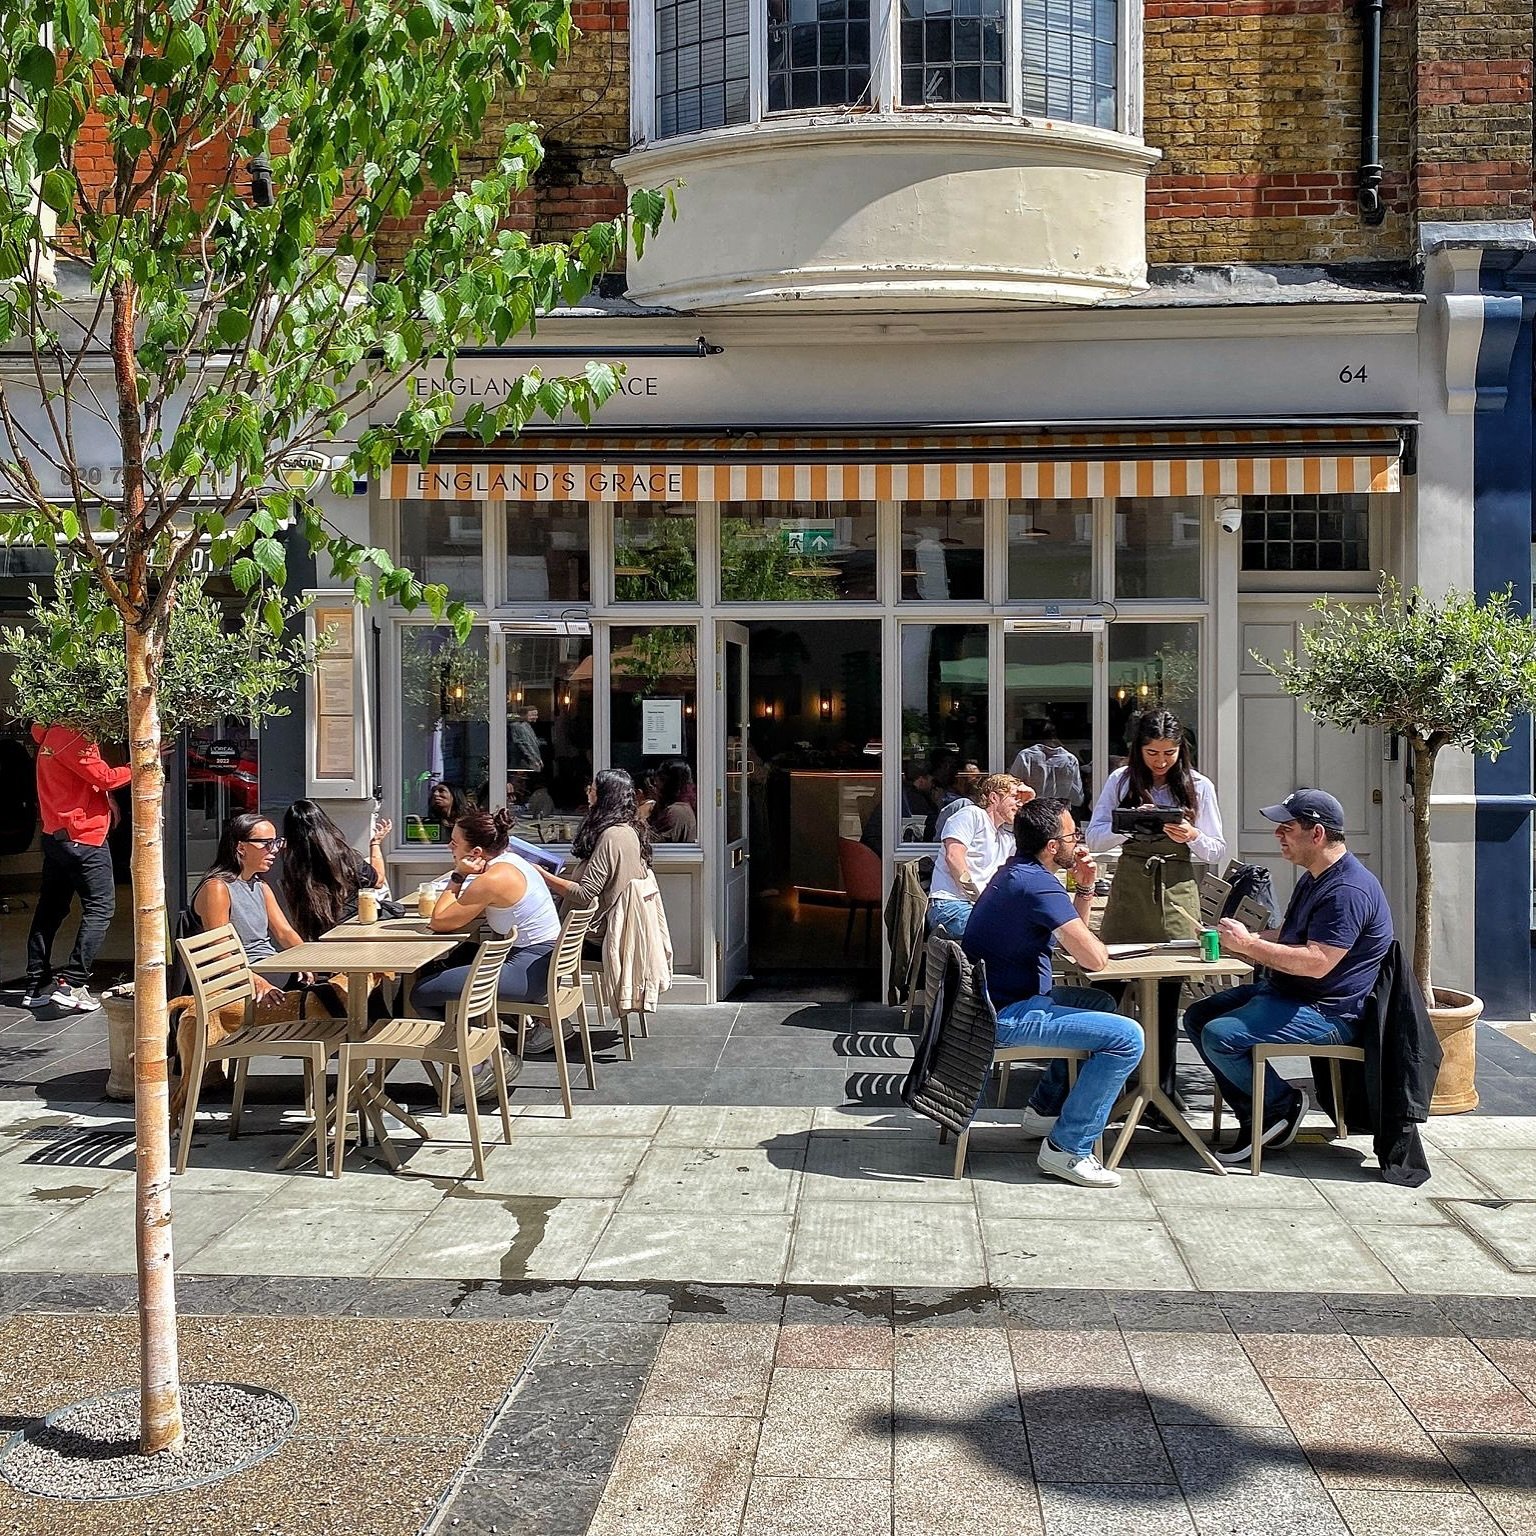 Long weekends are the best kind of weekends, who&rsquo;s joining us today? We&rsquo;re open until 5.30!
.
.
.
.
#BankHoliday #BankHolidayWeekend #weekend #alfresco #stjohnswood #brunch #lunch #brunchlondon